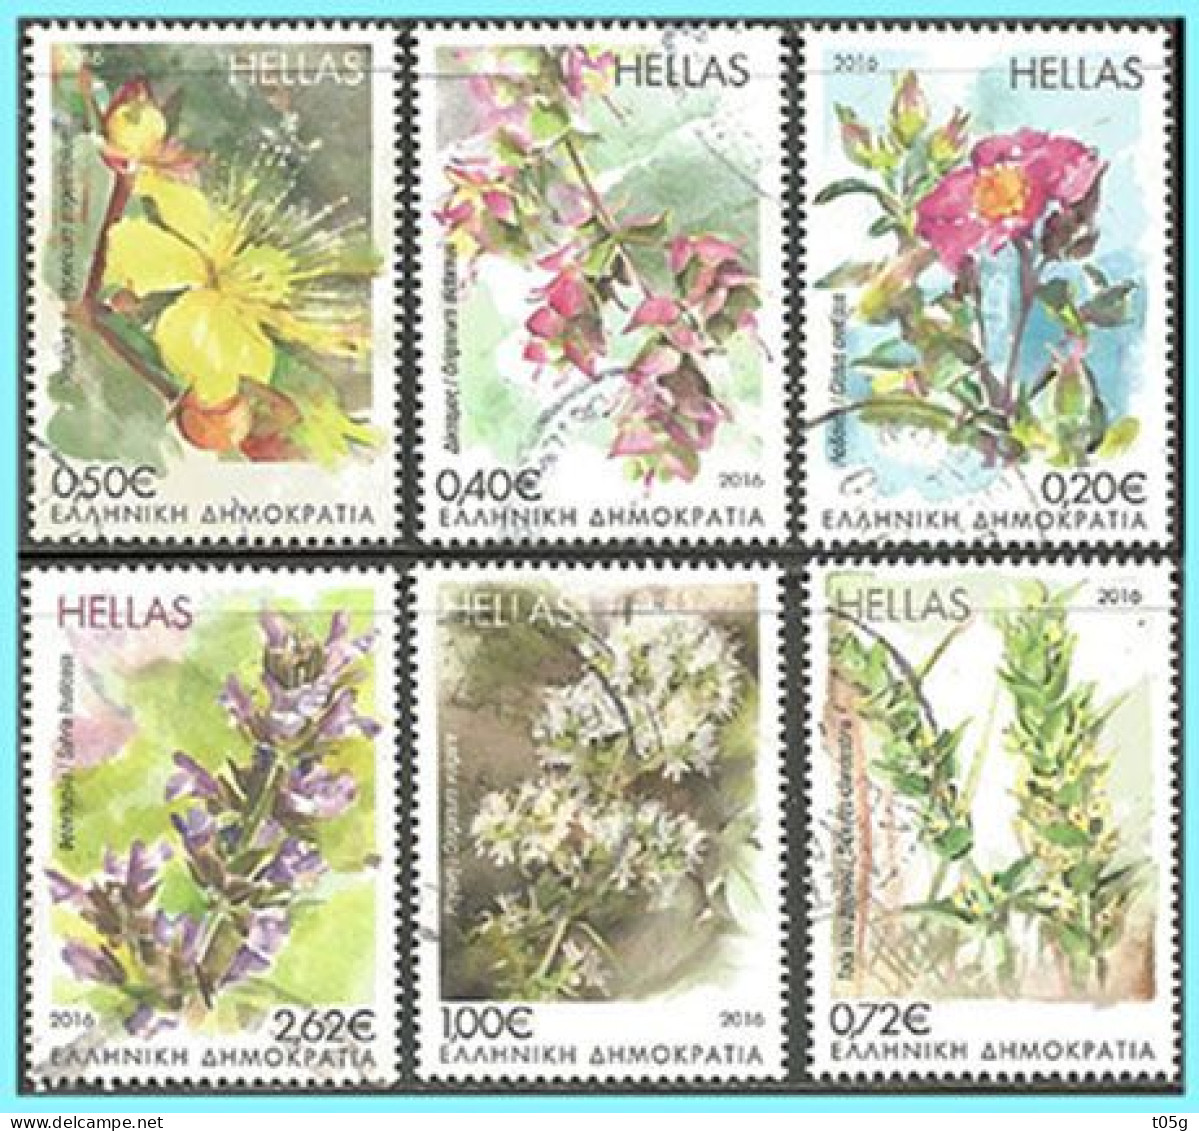 GREECE-GRECE- HELLAS 2016: Compl Set Used - Used Stamps